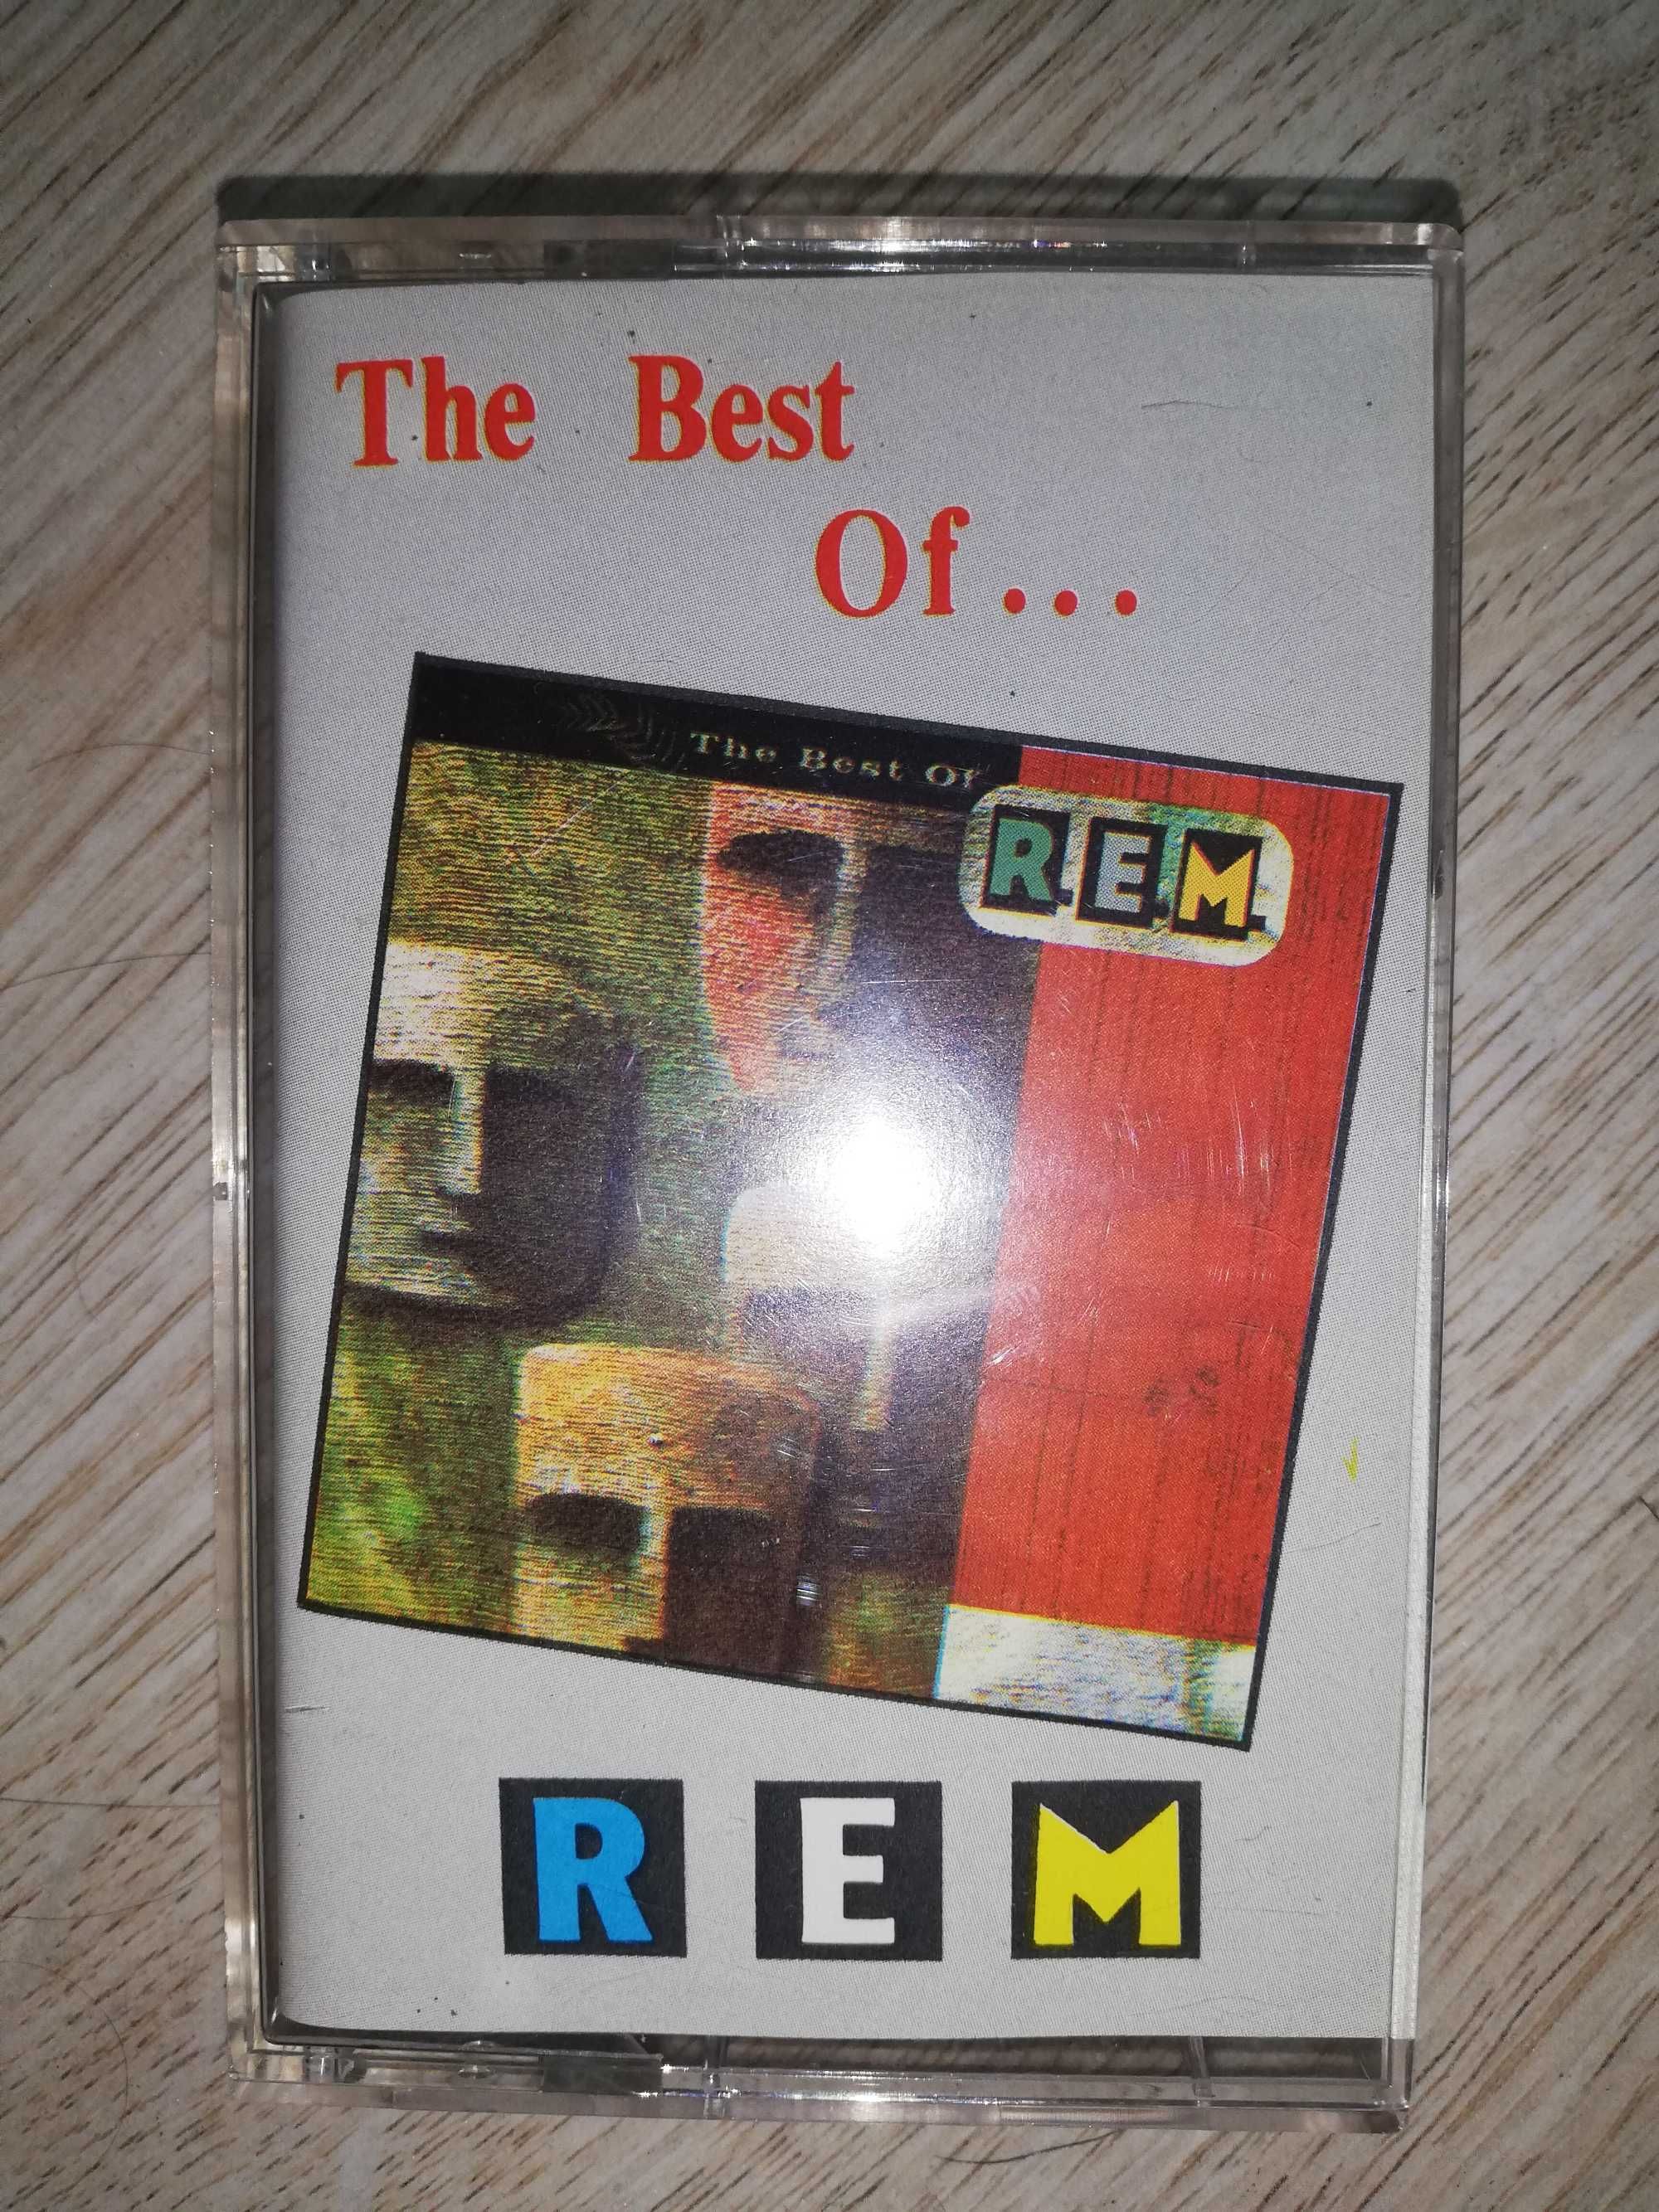 The best of...R.E.M.